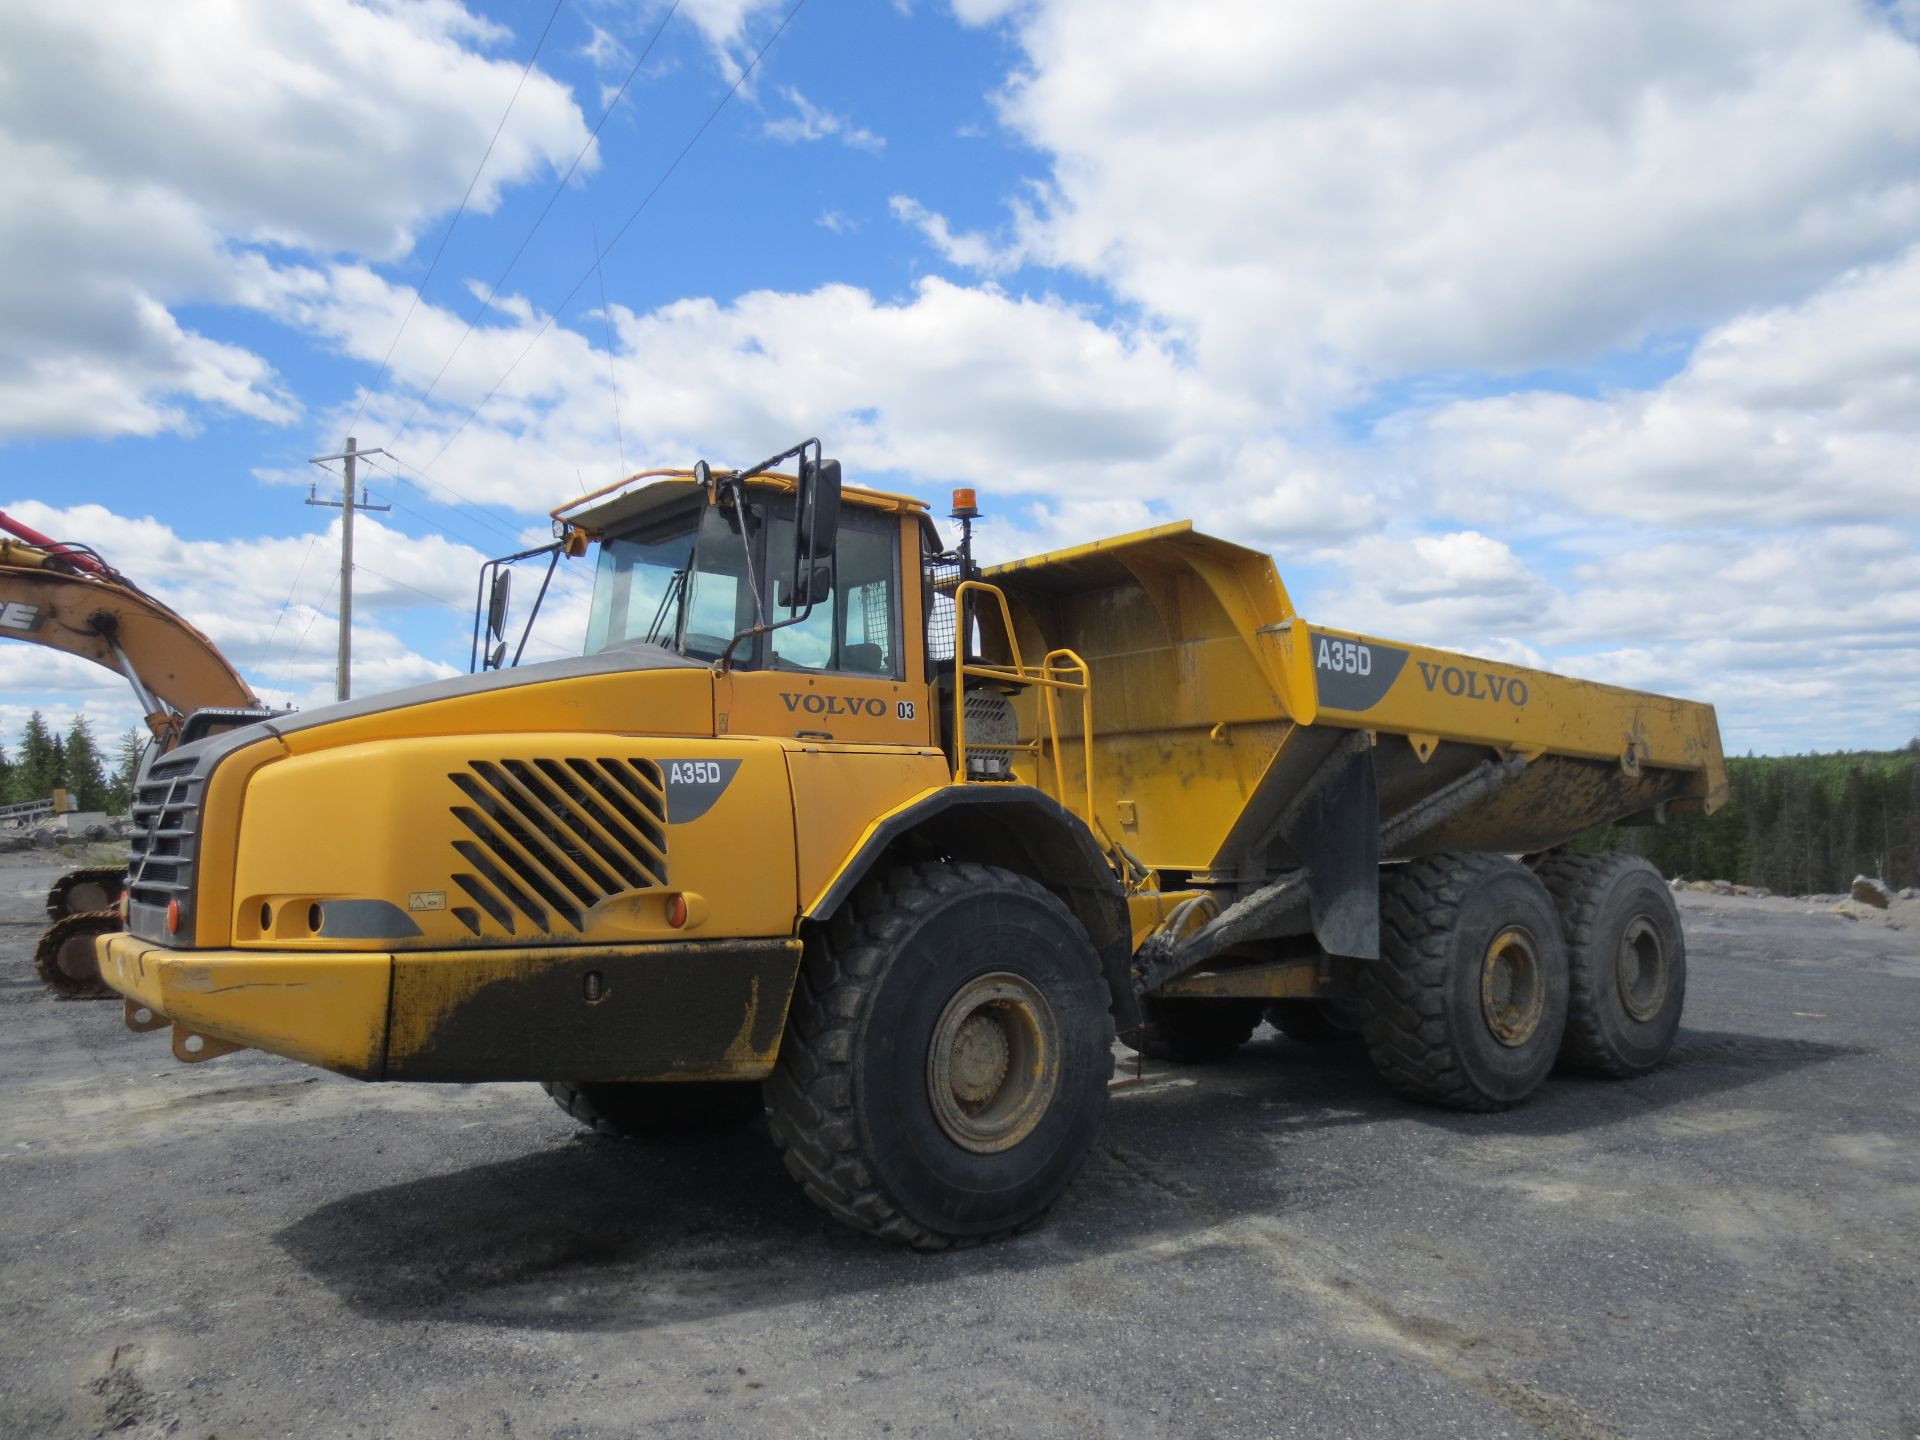 2003 Volvo A35D Articulated Dump Truck, s/n A35DV71067, 26.5R x 25 Tires,14,100 Hours Showing (DRY)